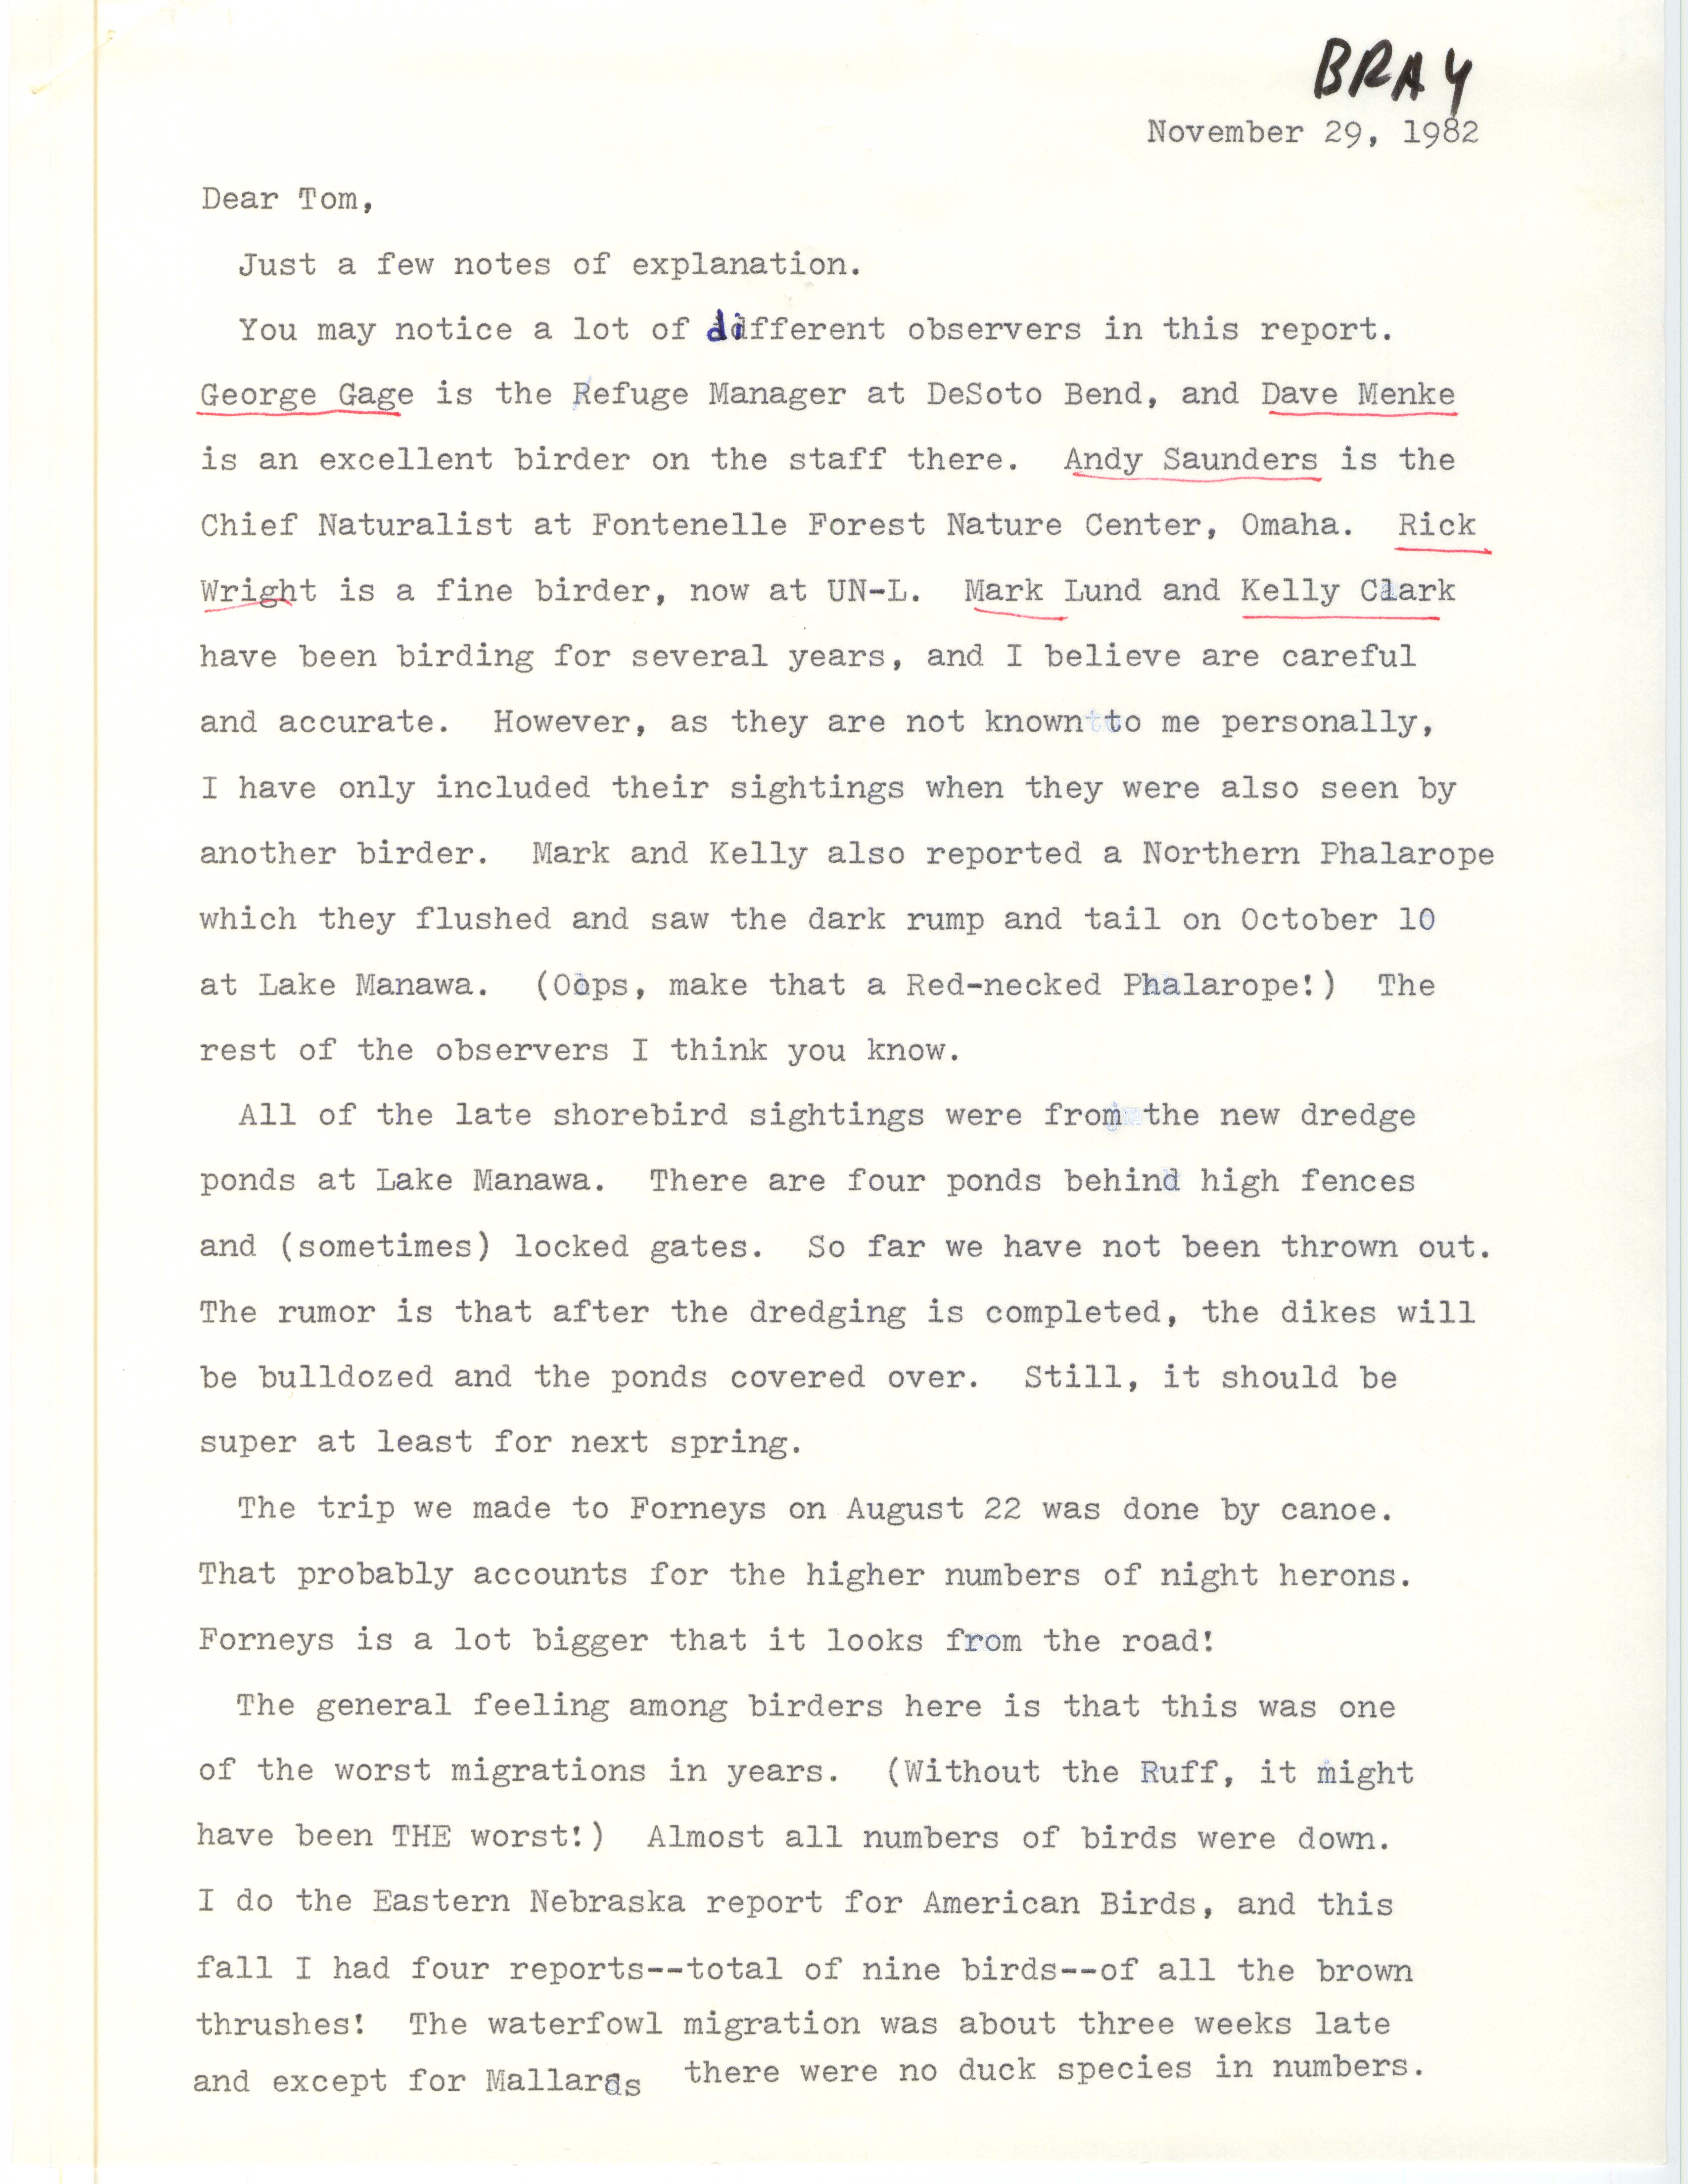 Tanya Bray letter and field report to Thomas H. Kent, November 29, 1982